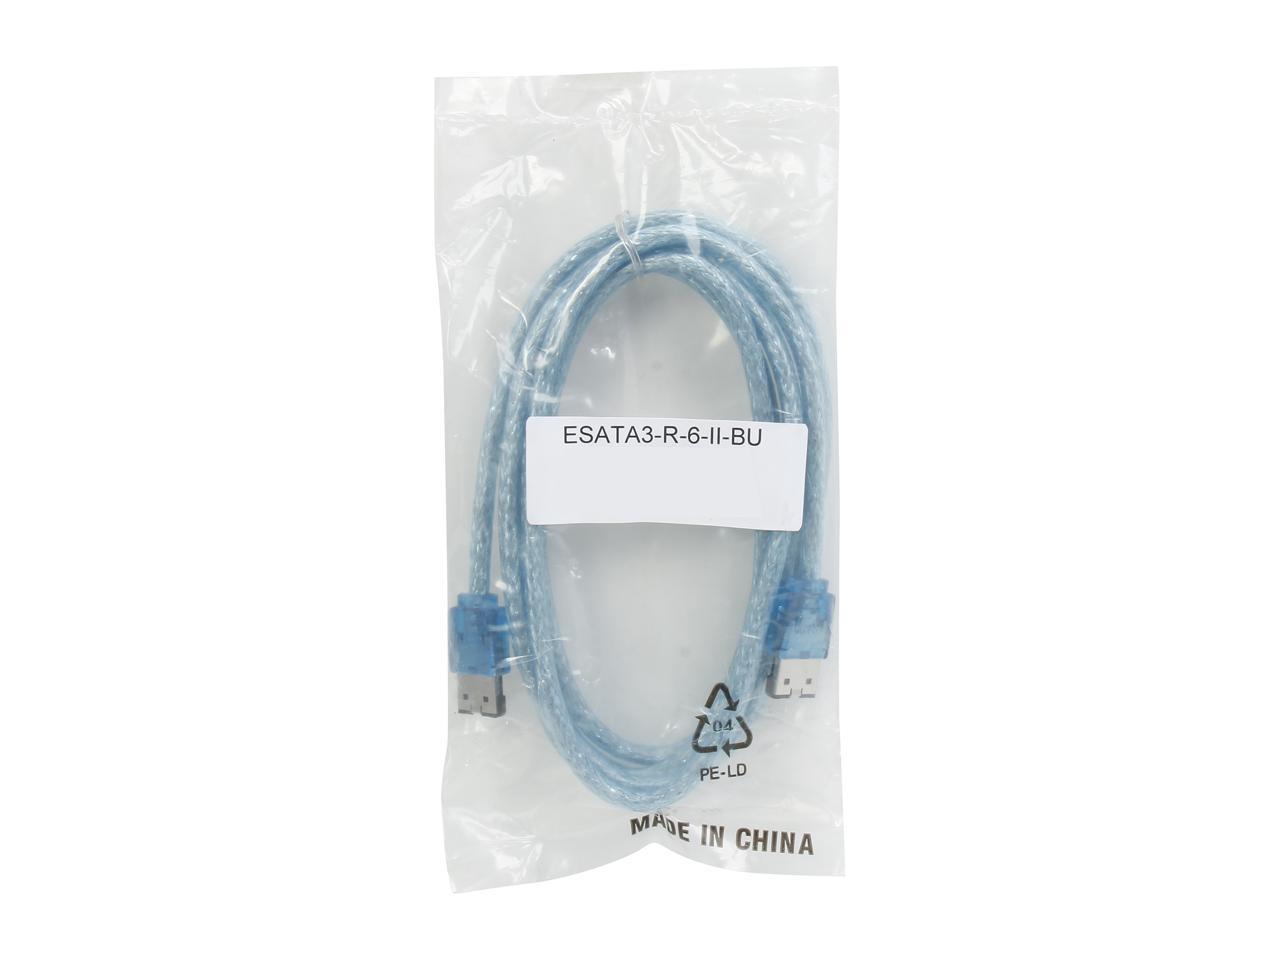 Nippon Labs ESATA3-R-6-ll-BU 6 ft. eSATA III(Type I) Male to Male Cable, Blue - image 3 of 3